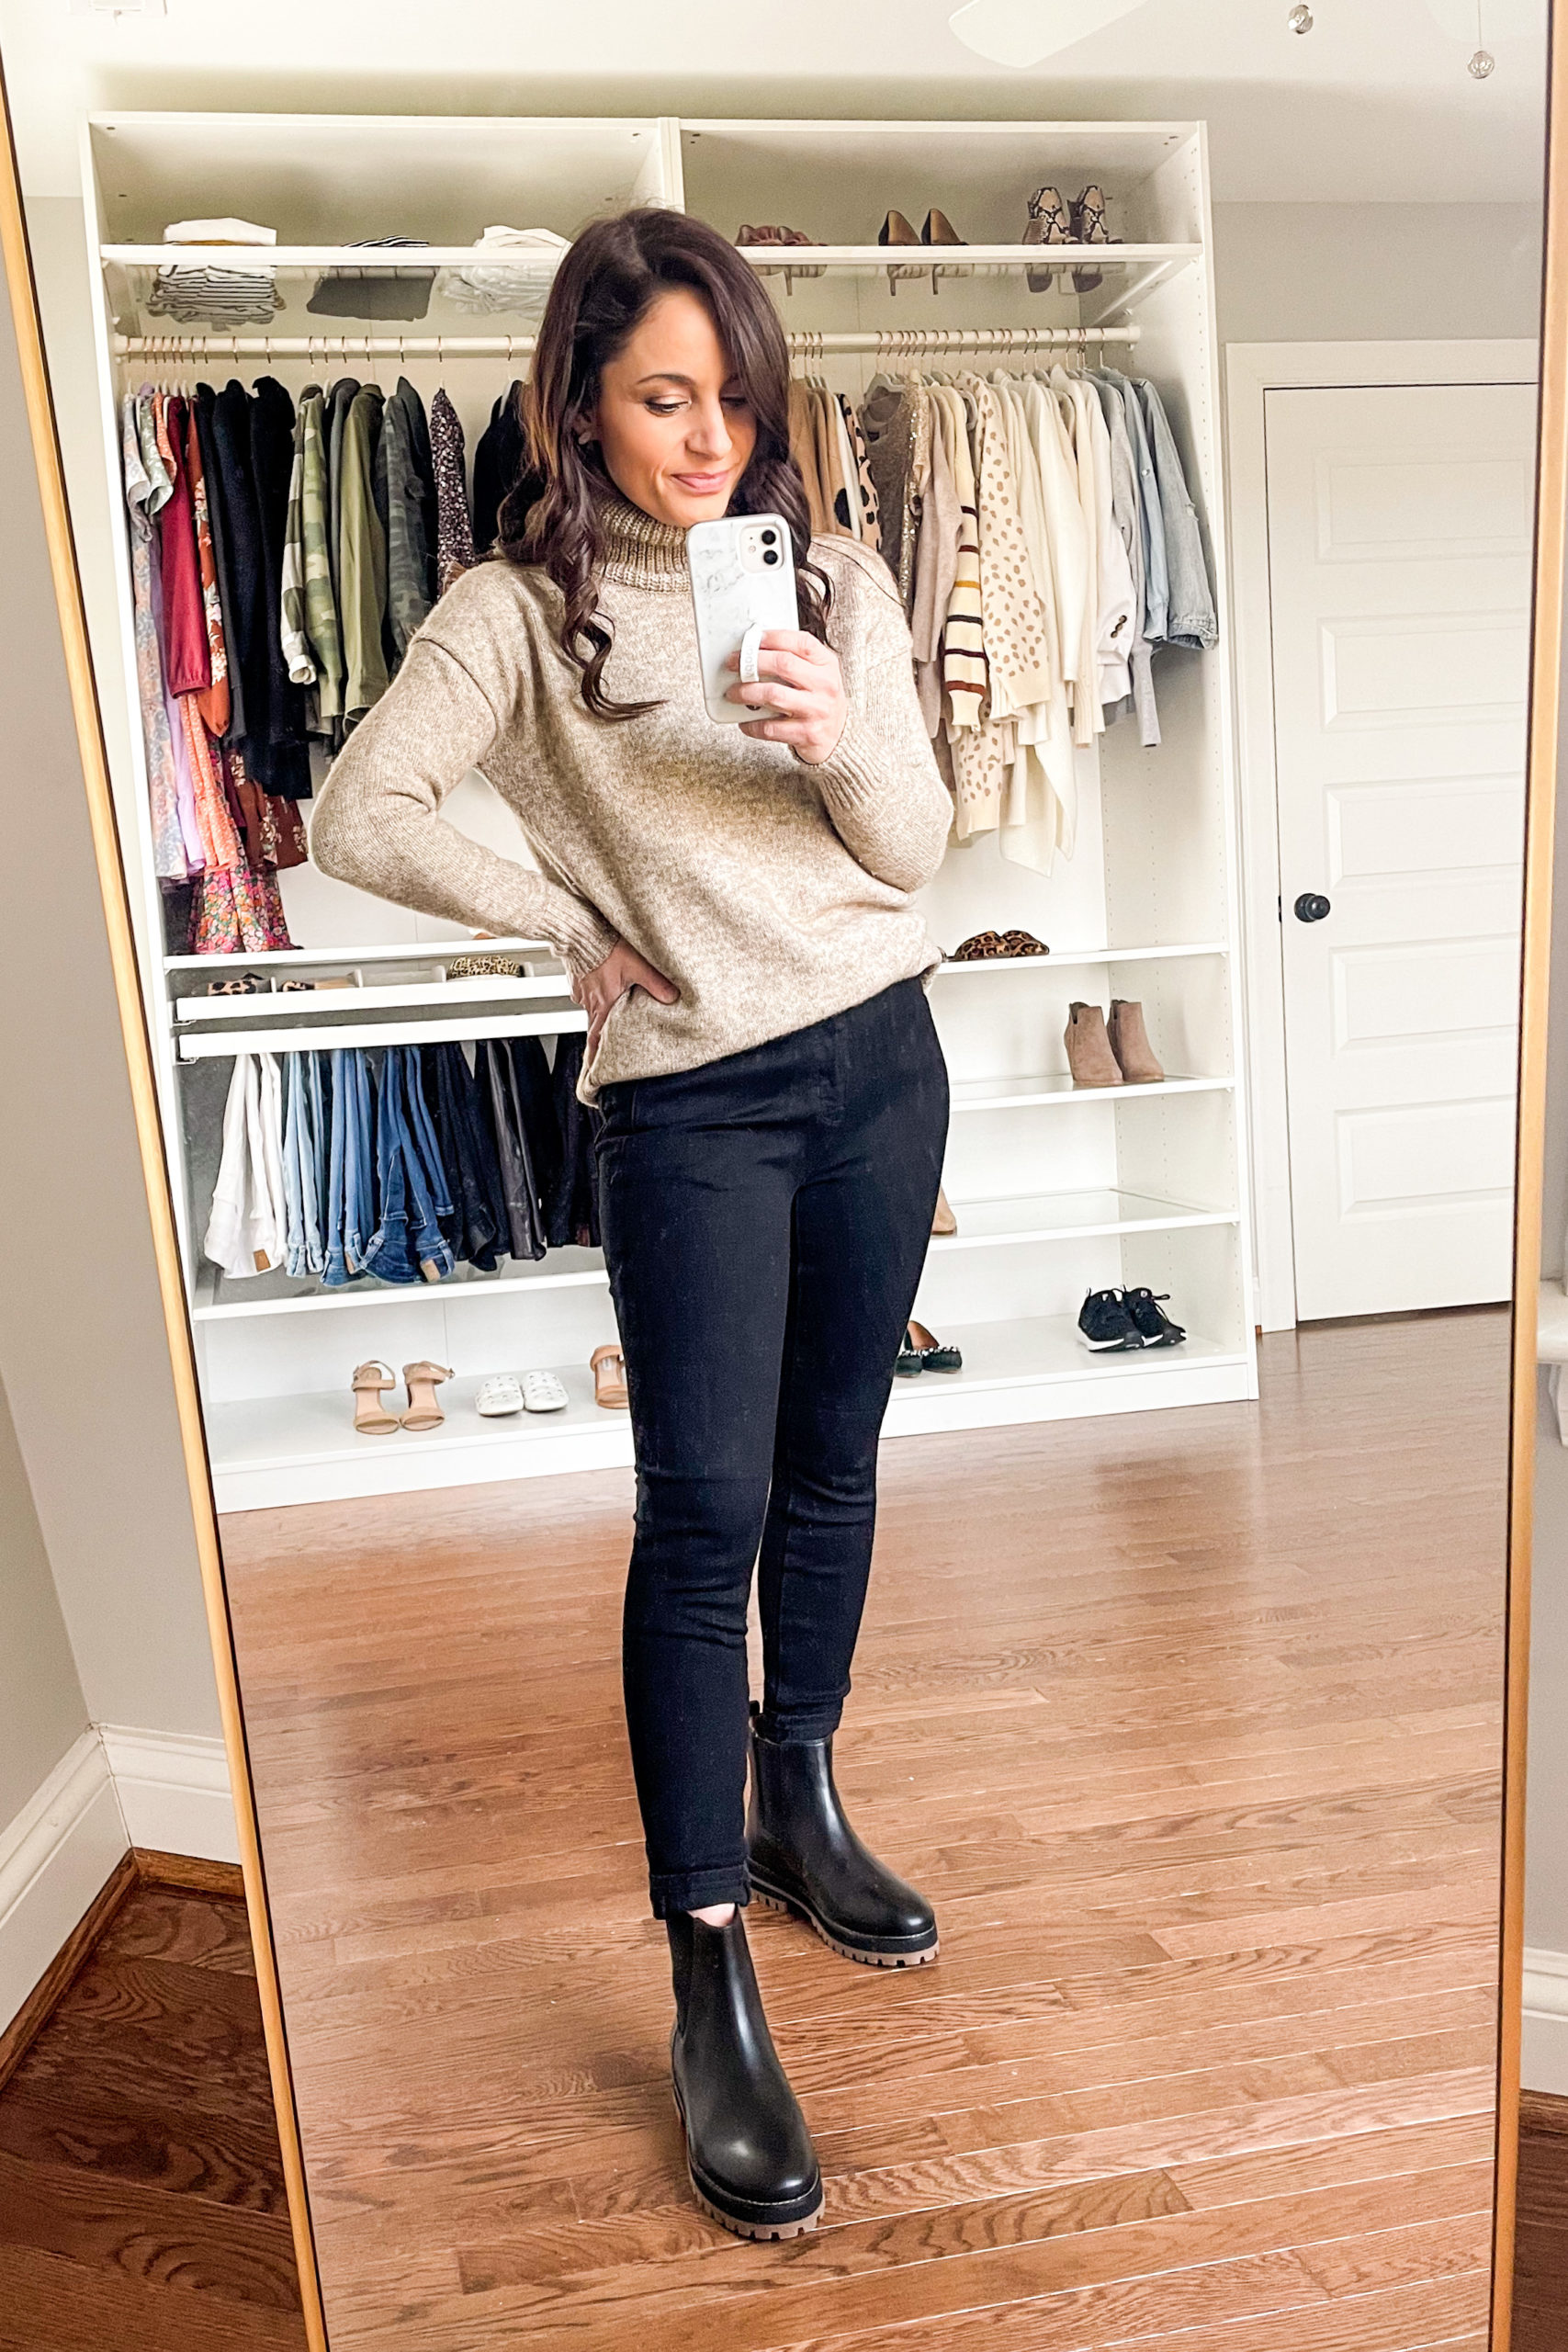 black jeans and chelsea boots outfit for winter | 10 items 20 outfits | capsule wardrobe | petite fashion 